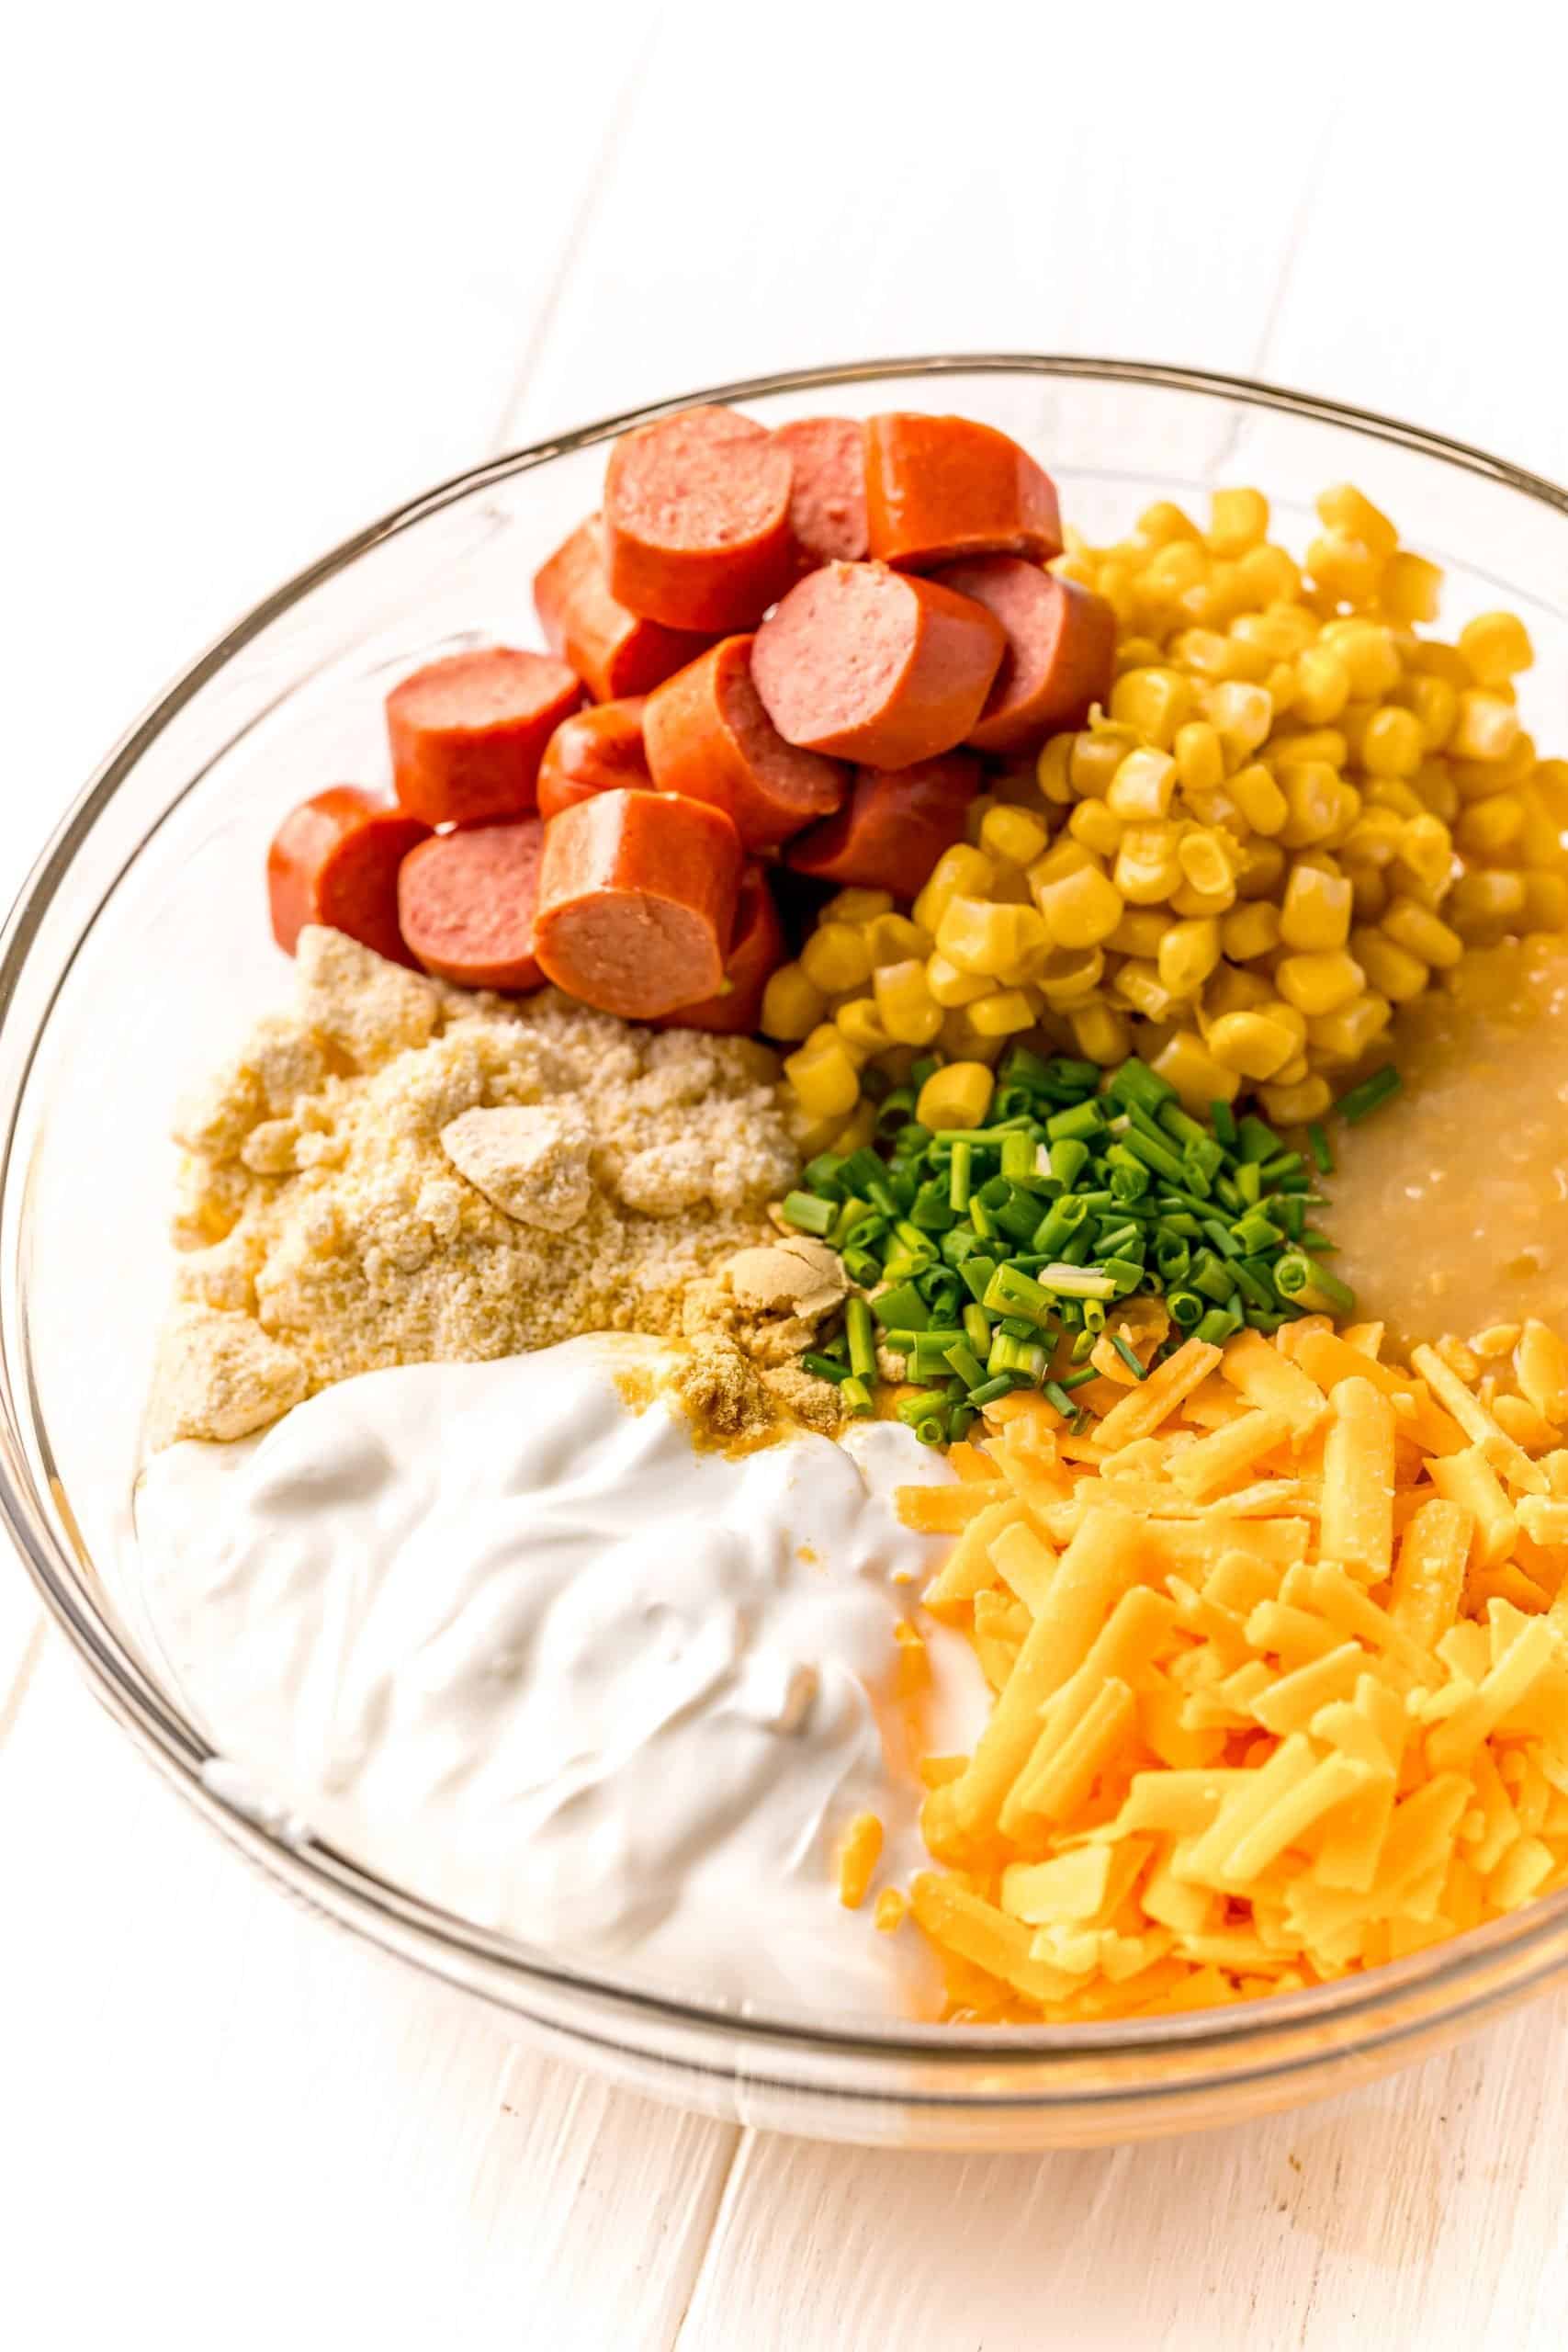 cream style sweet corn, whole kernel sweet corn, sour cream, salted butter, shredded cheddar cheese, Jiffy Corn Muffin Mix, minced chives, mustard powder, hot dogs in a large, clear mixing bowl.